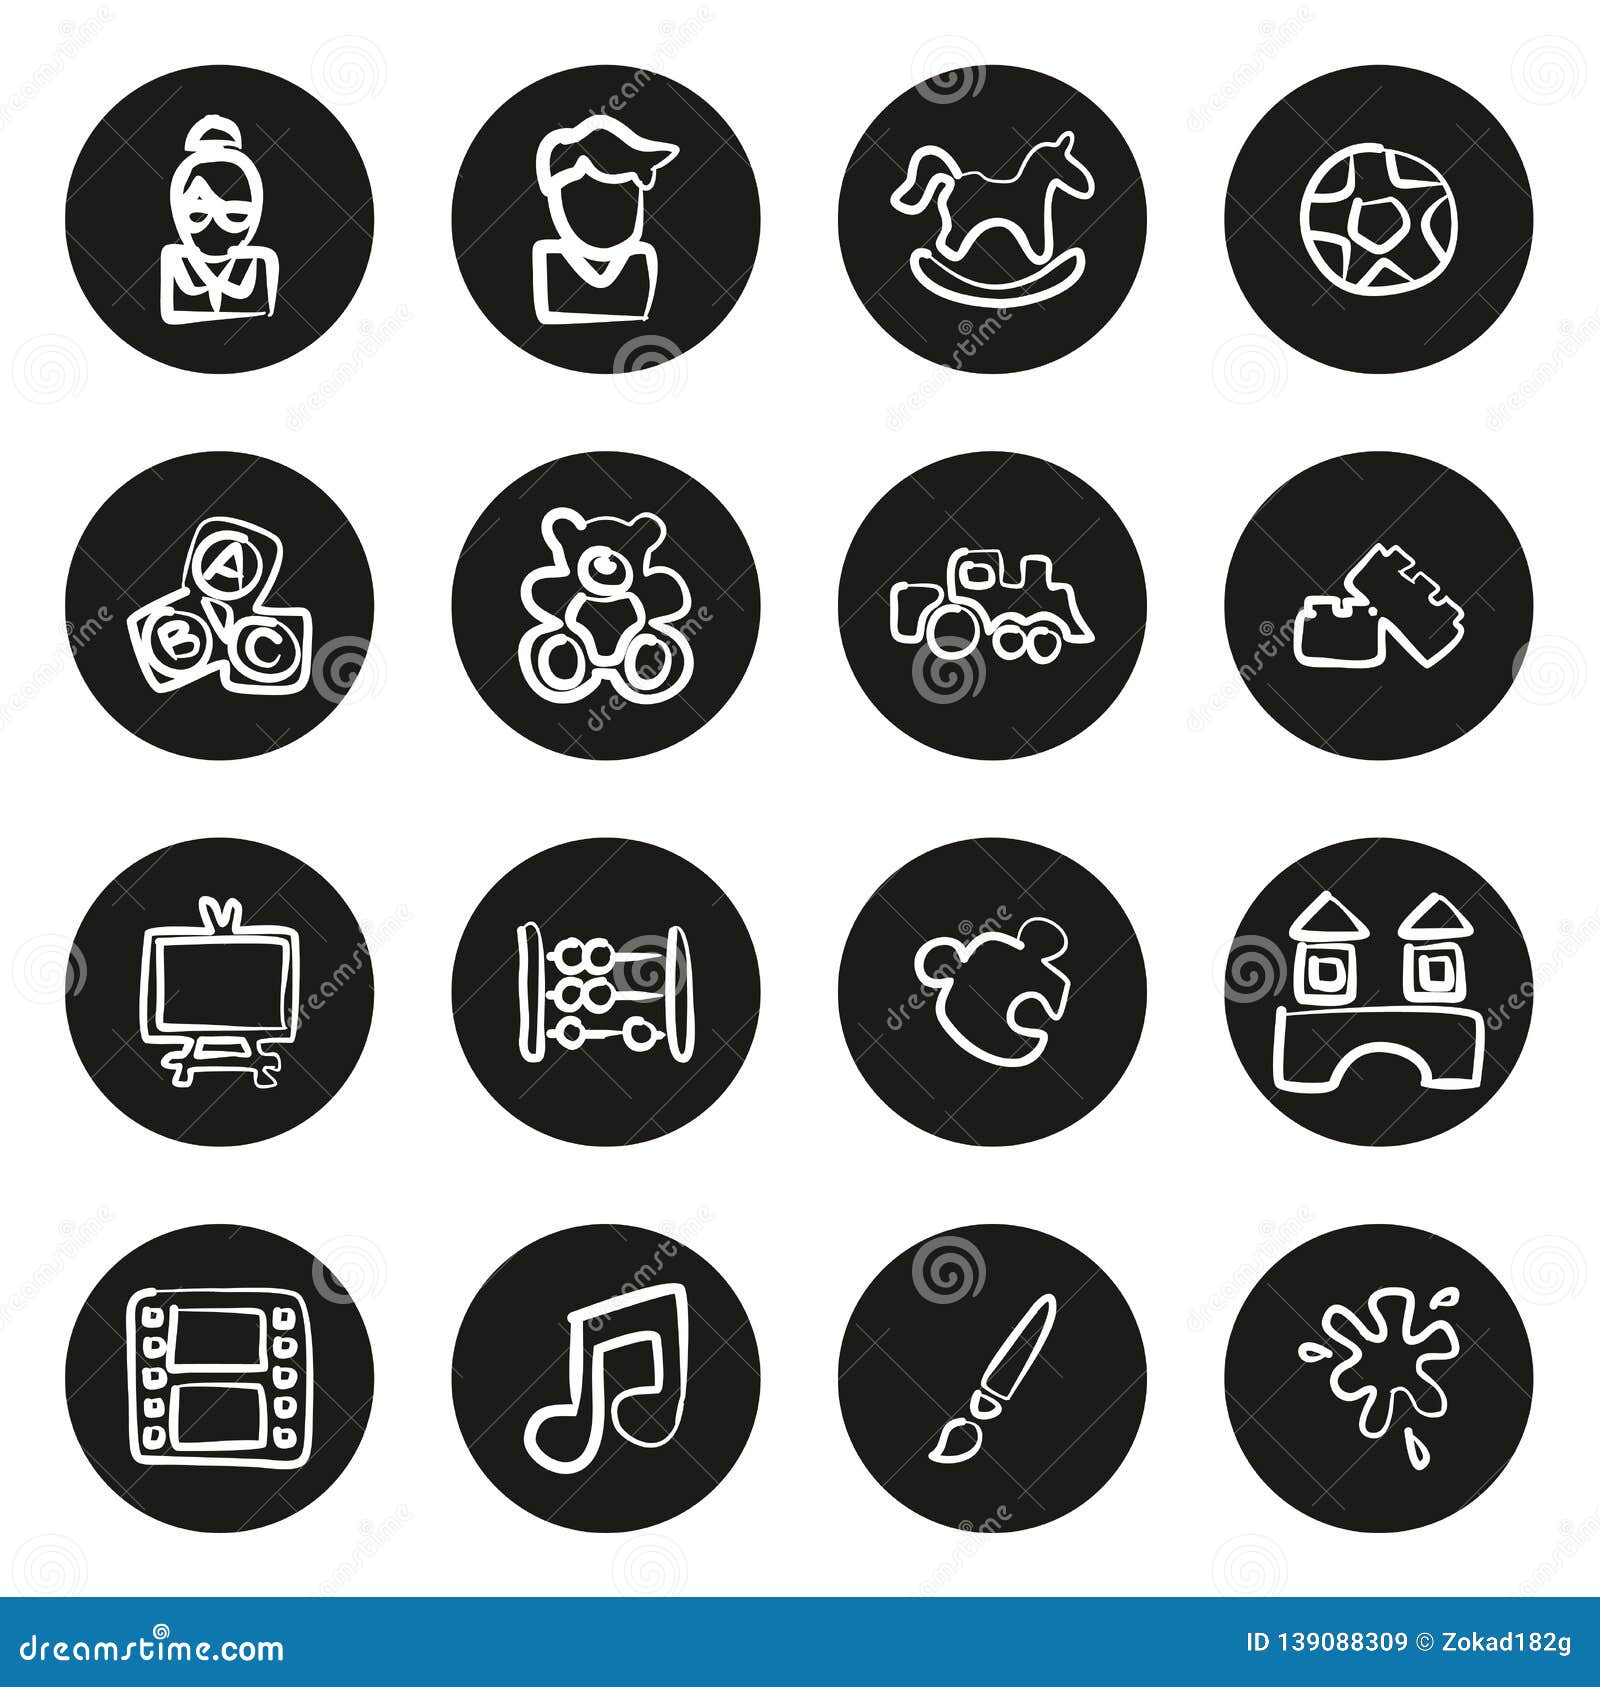 Kindergarten or Day Care Icons Freehand White on Black Circle Stock ...